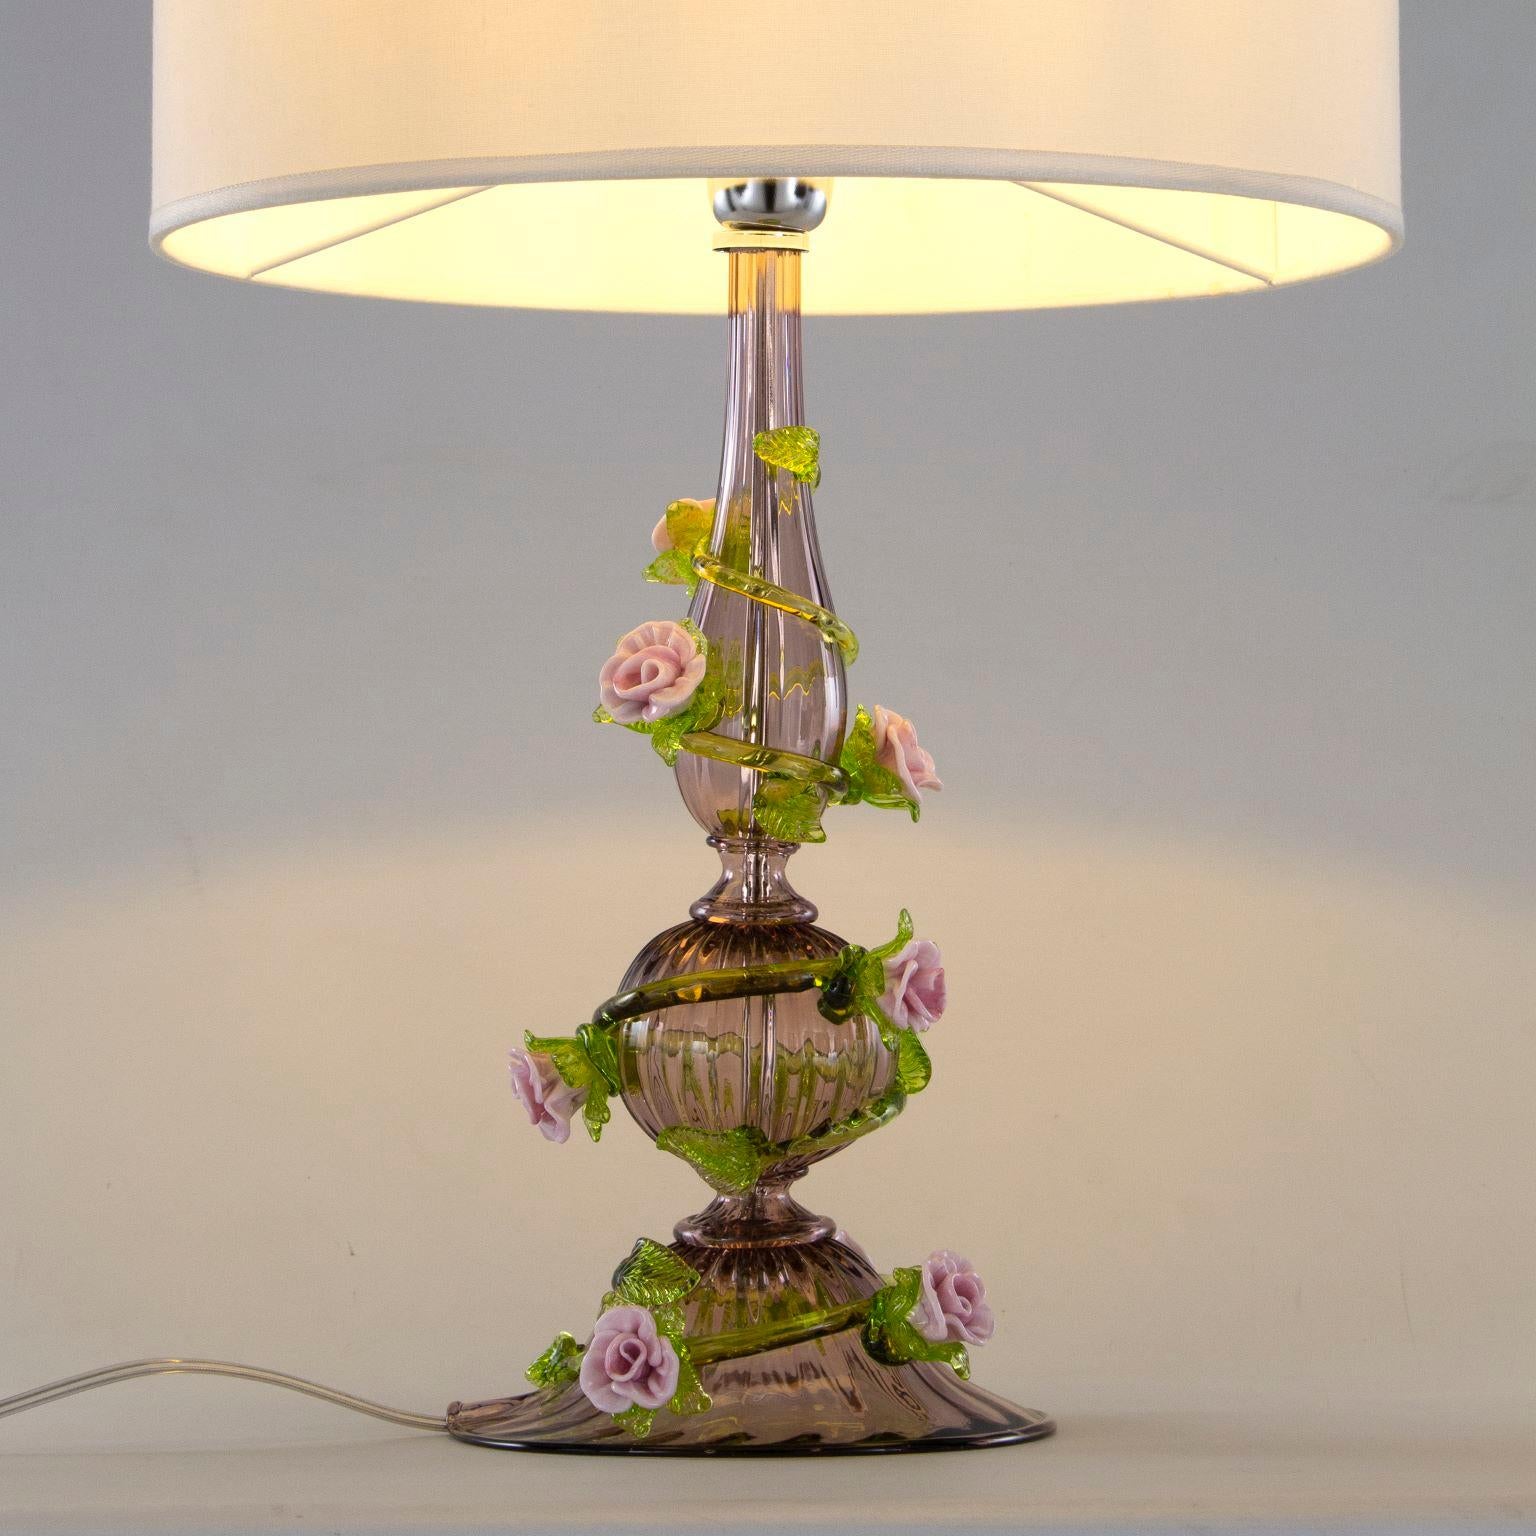 Rosae Rosarum Garden is a table lamp with 1 light, in amethyst colour and details in green and in pink vitreous paste. A white fabric lampshade with a rectangular shape covers the light bulb. It is a romantic and with natural elements table lamp.